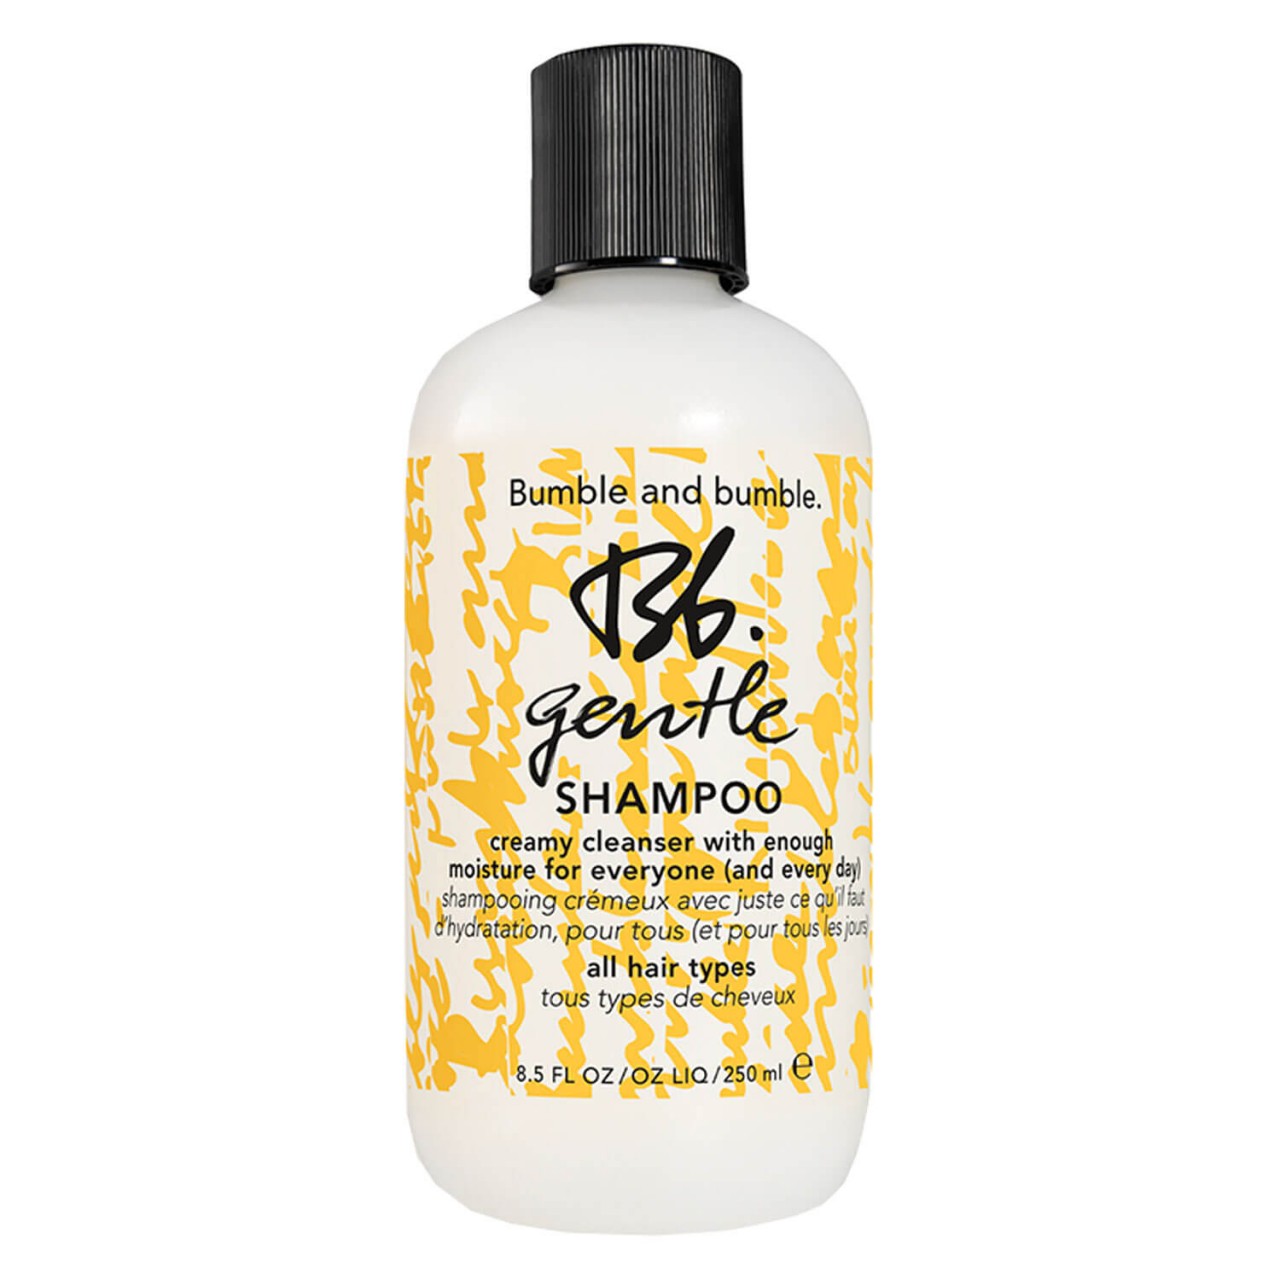 Bb. Care - Gentle Shampoo von Bumble and bumble.